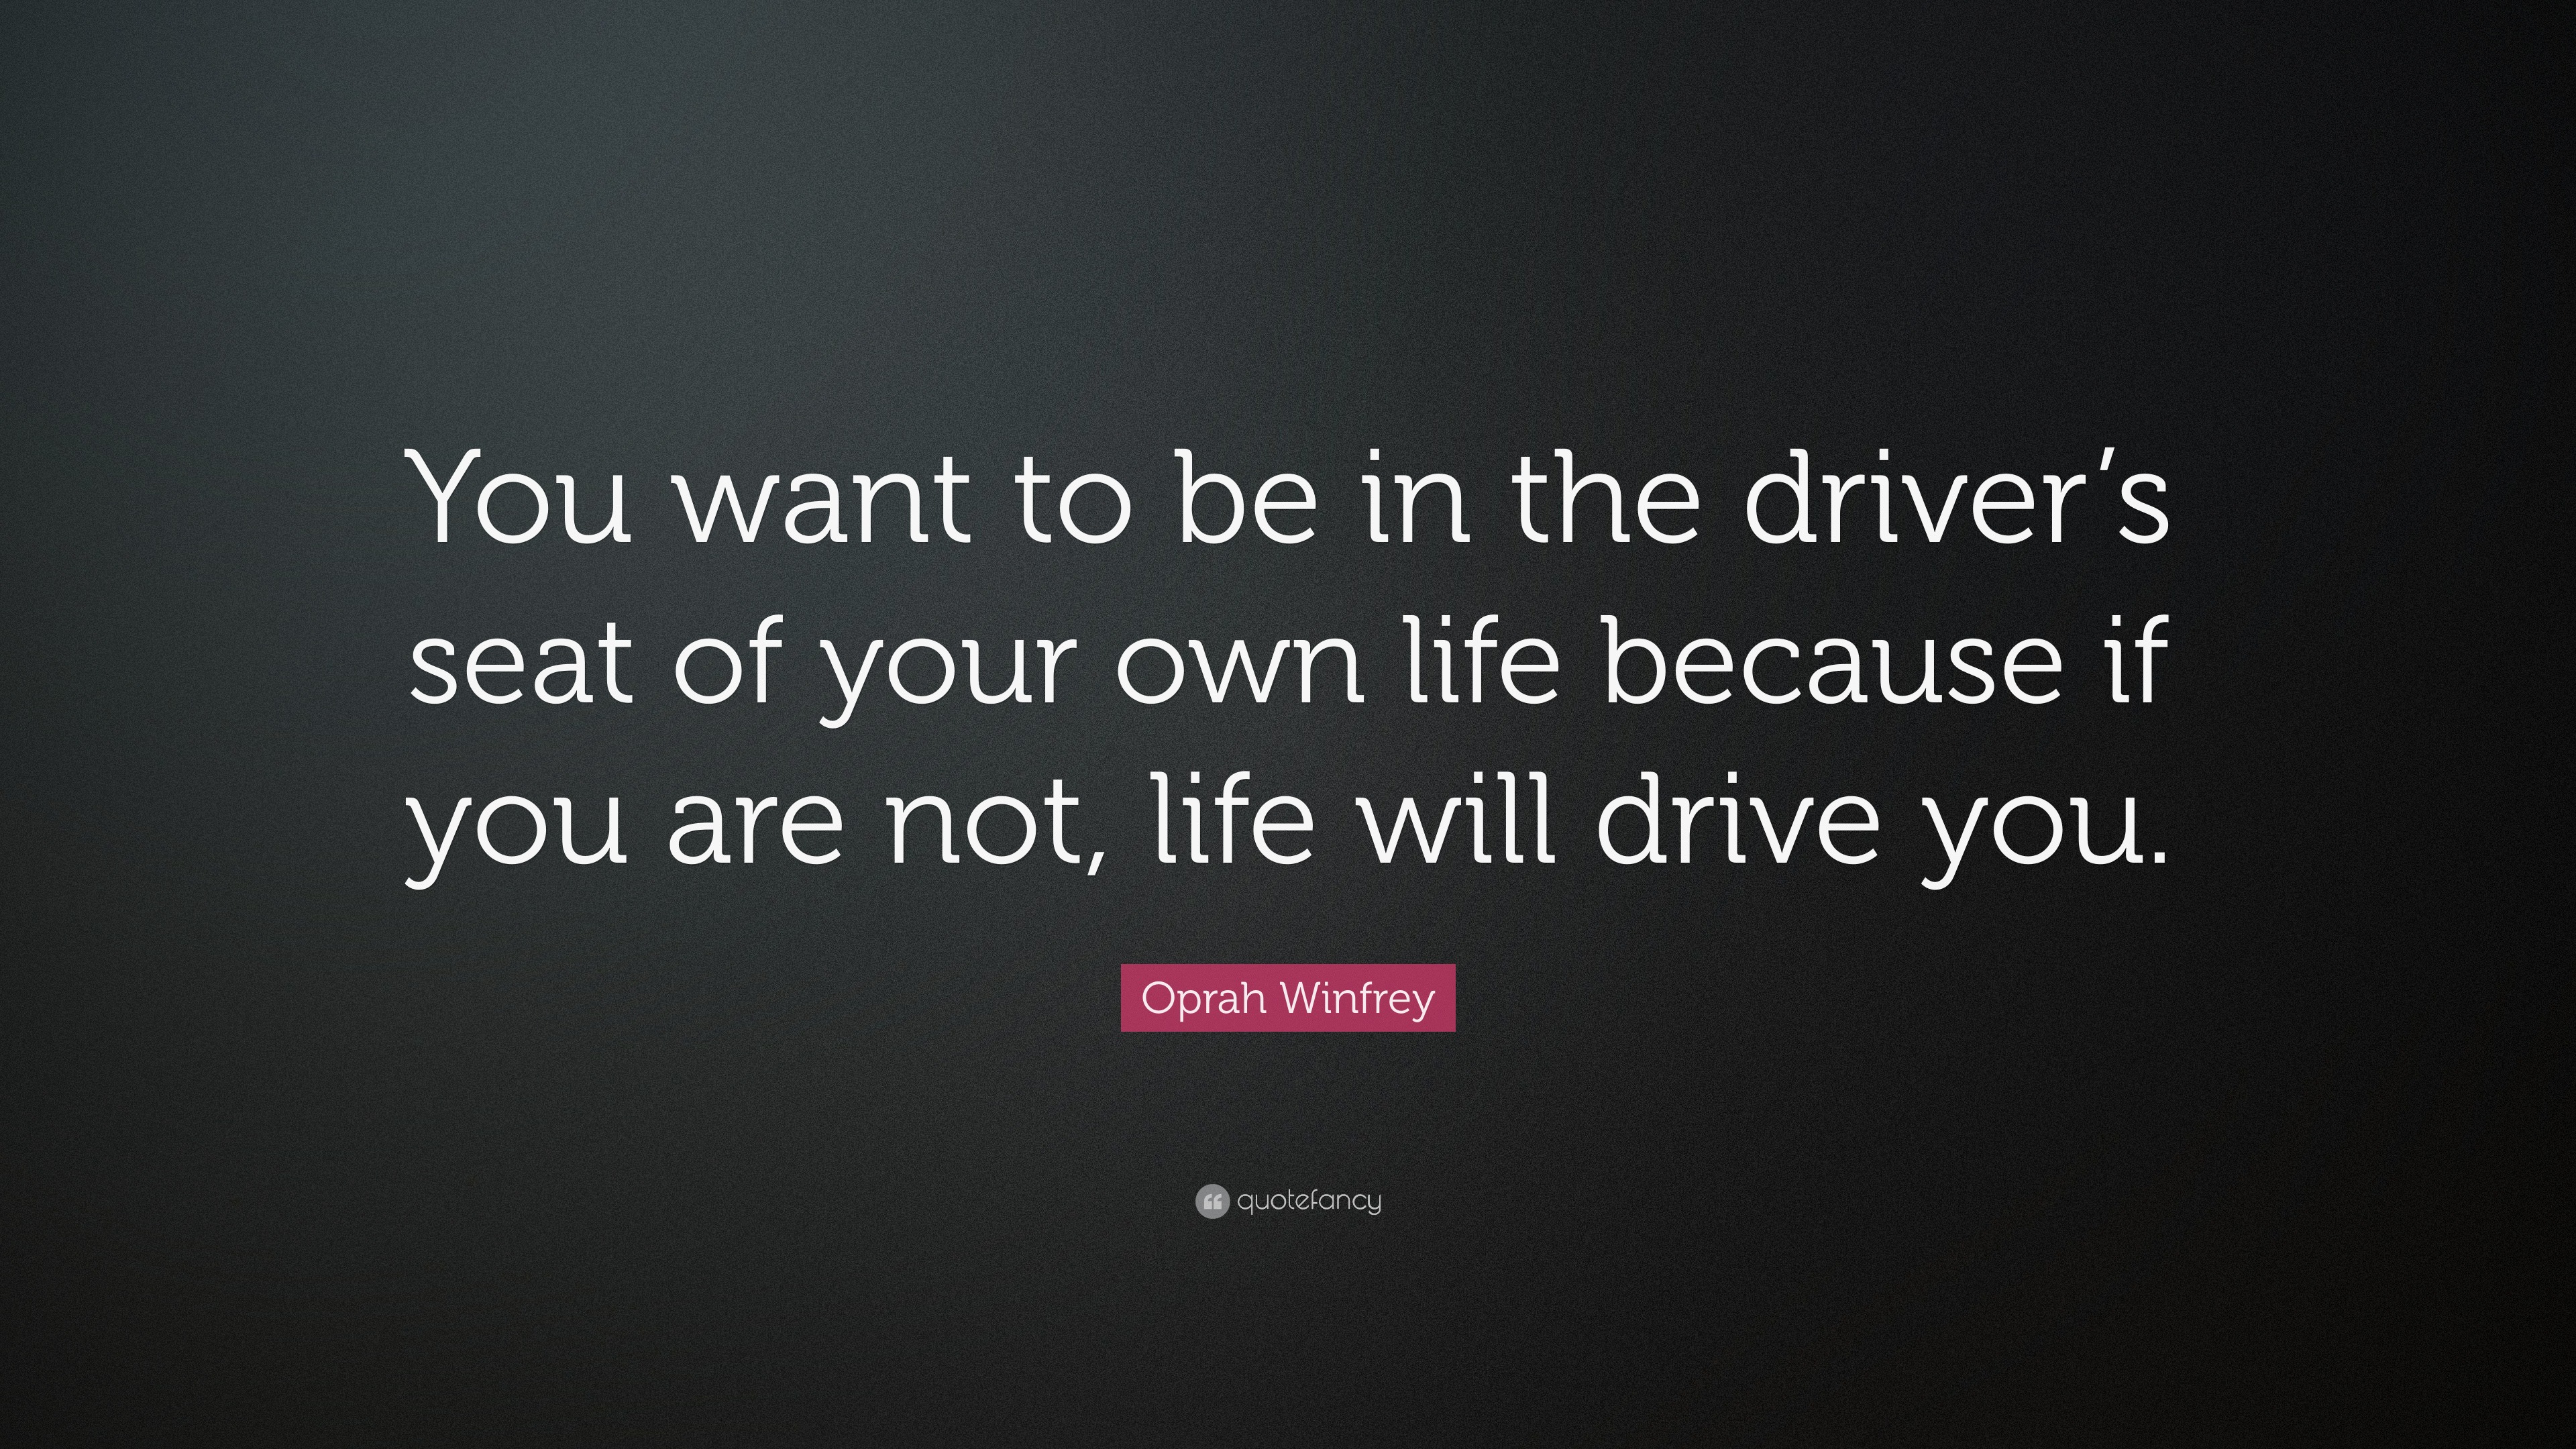 Oprah Winfrey Quote You Want To Be In The Driver S Seat Of Your Own Life Because